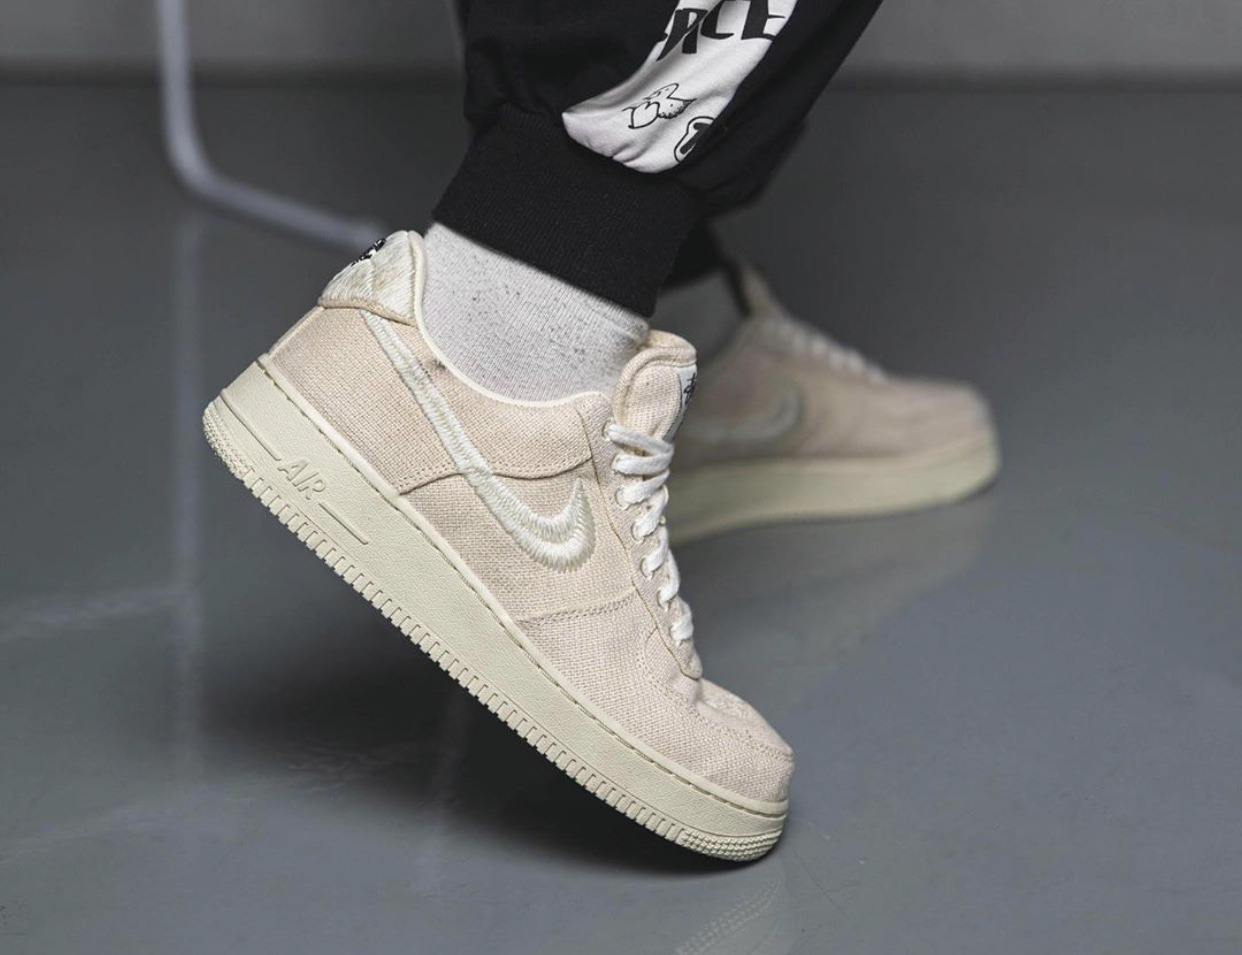 Stussy Nike Air Force 1 Low CZ9084-001 CZ9084-200 Release Date - SBD